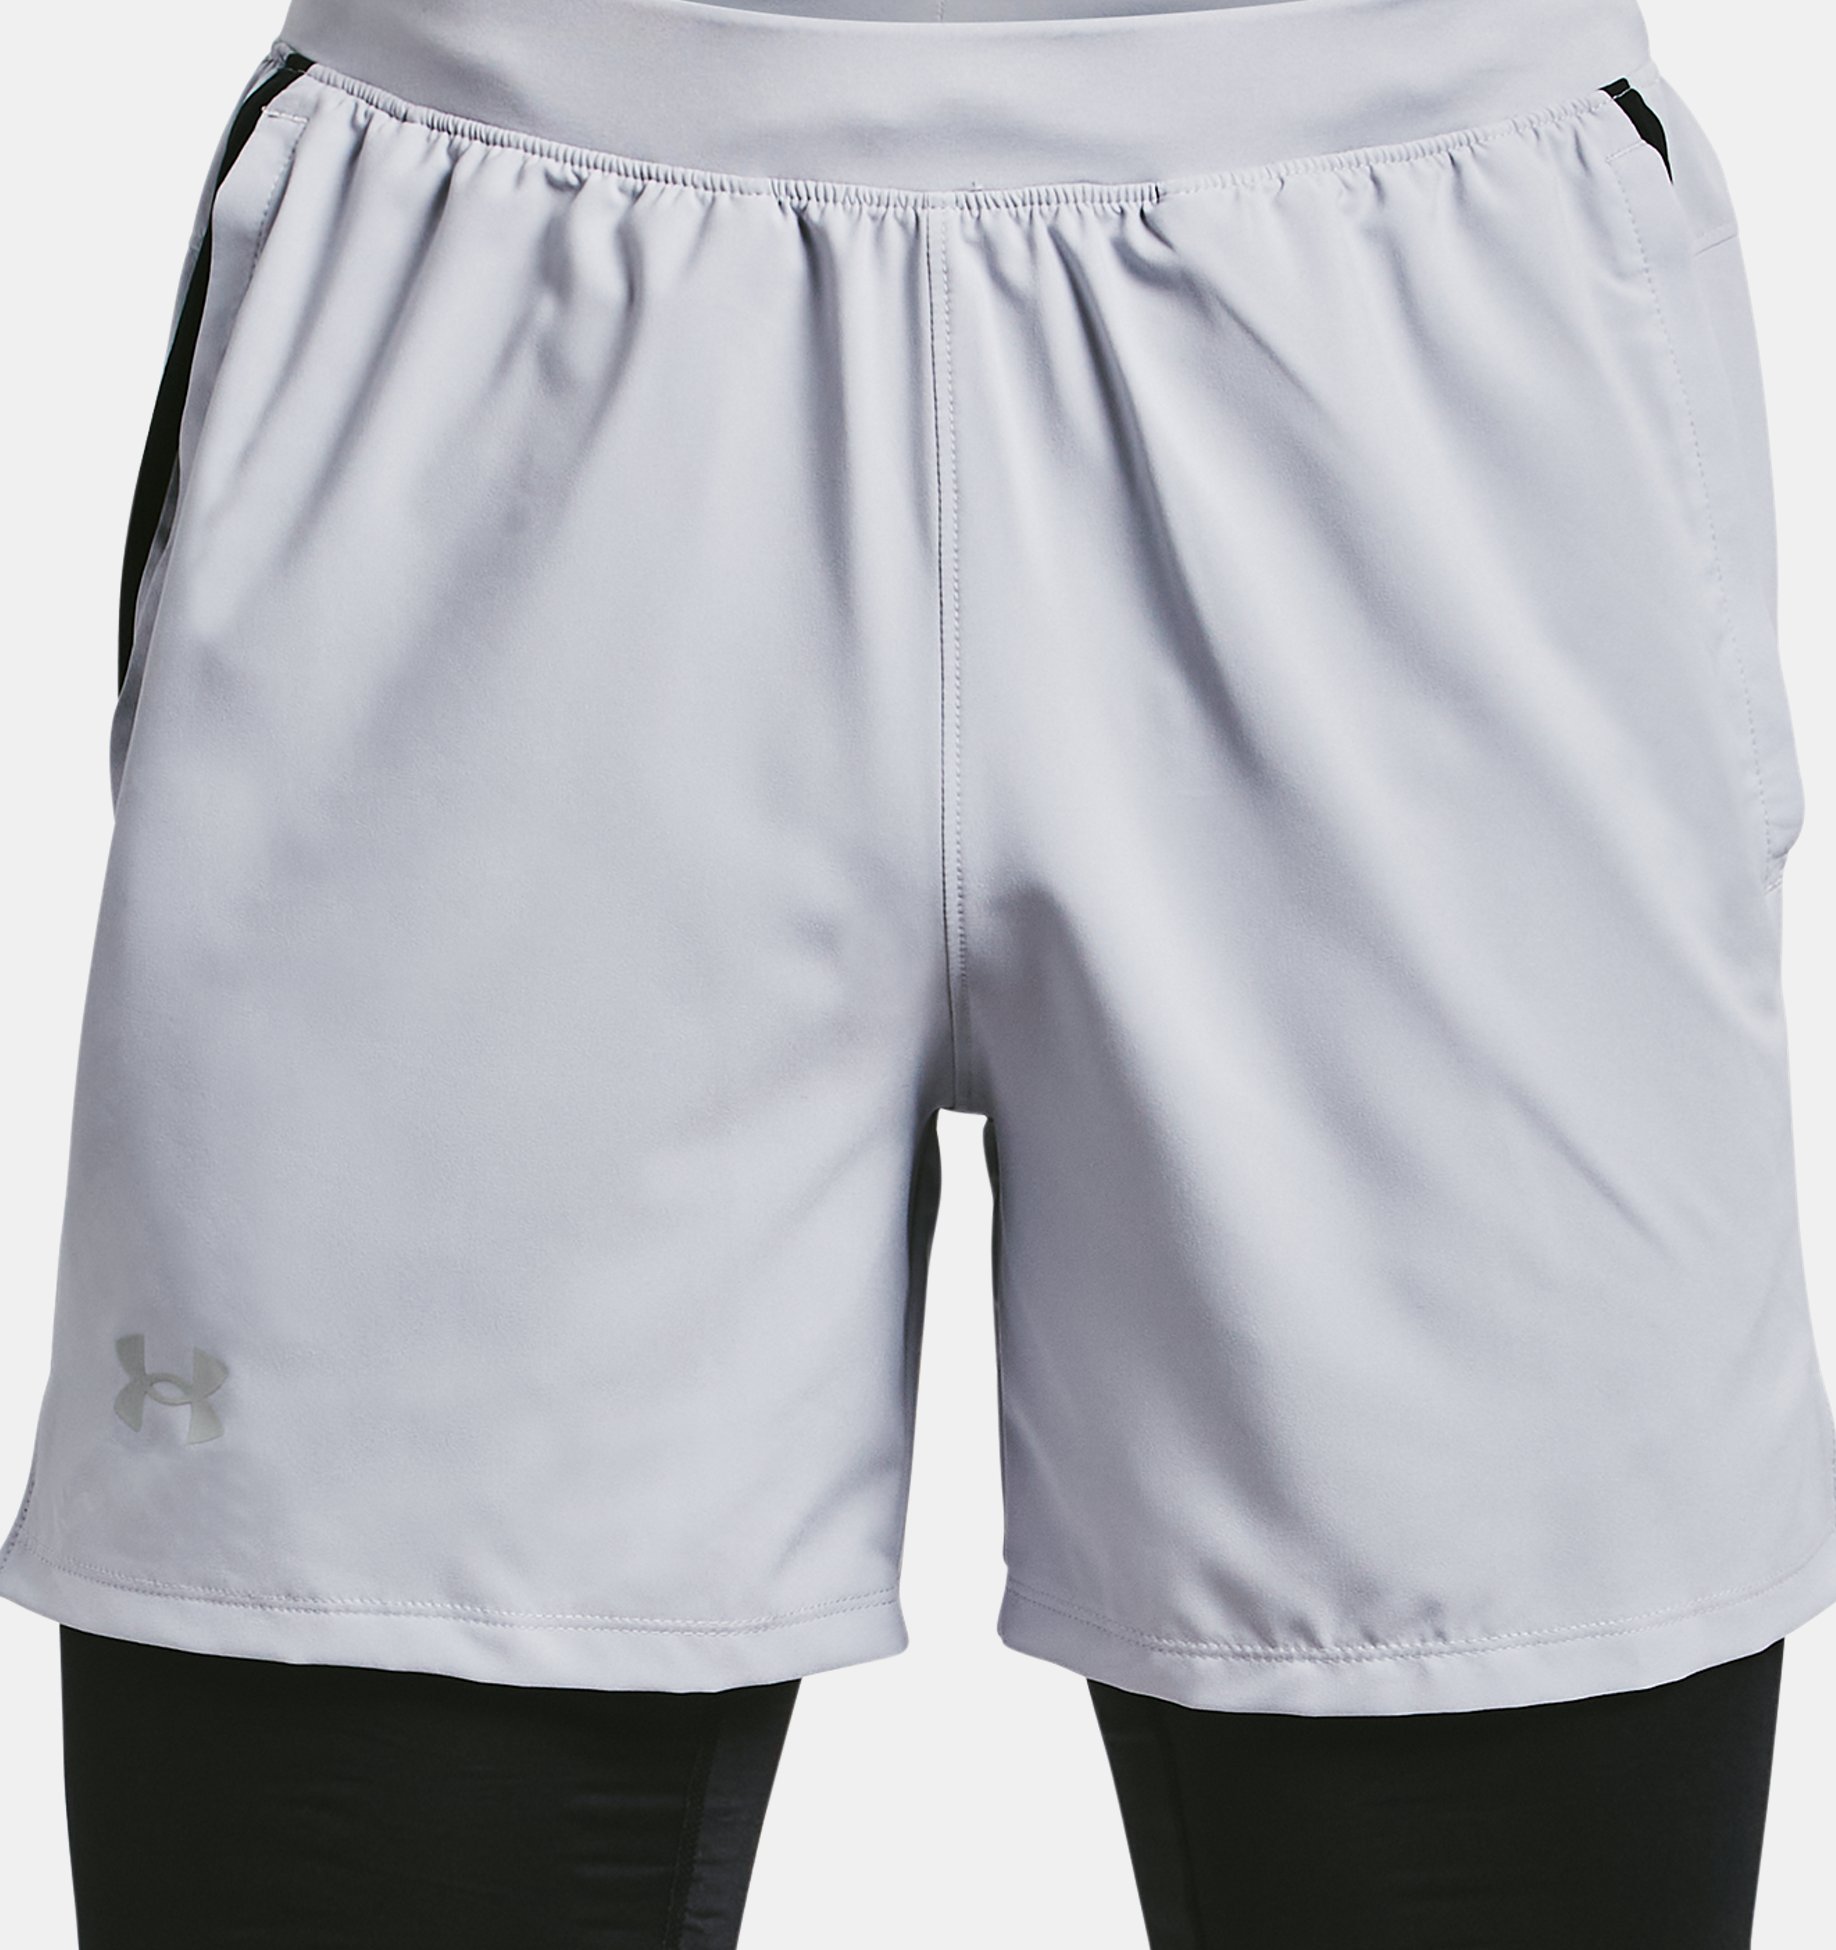 Launch 5'' 2-in-1 Shorts | Under Armour